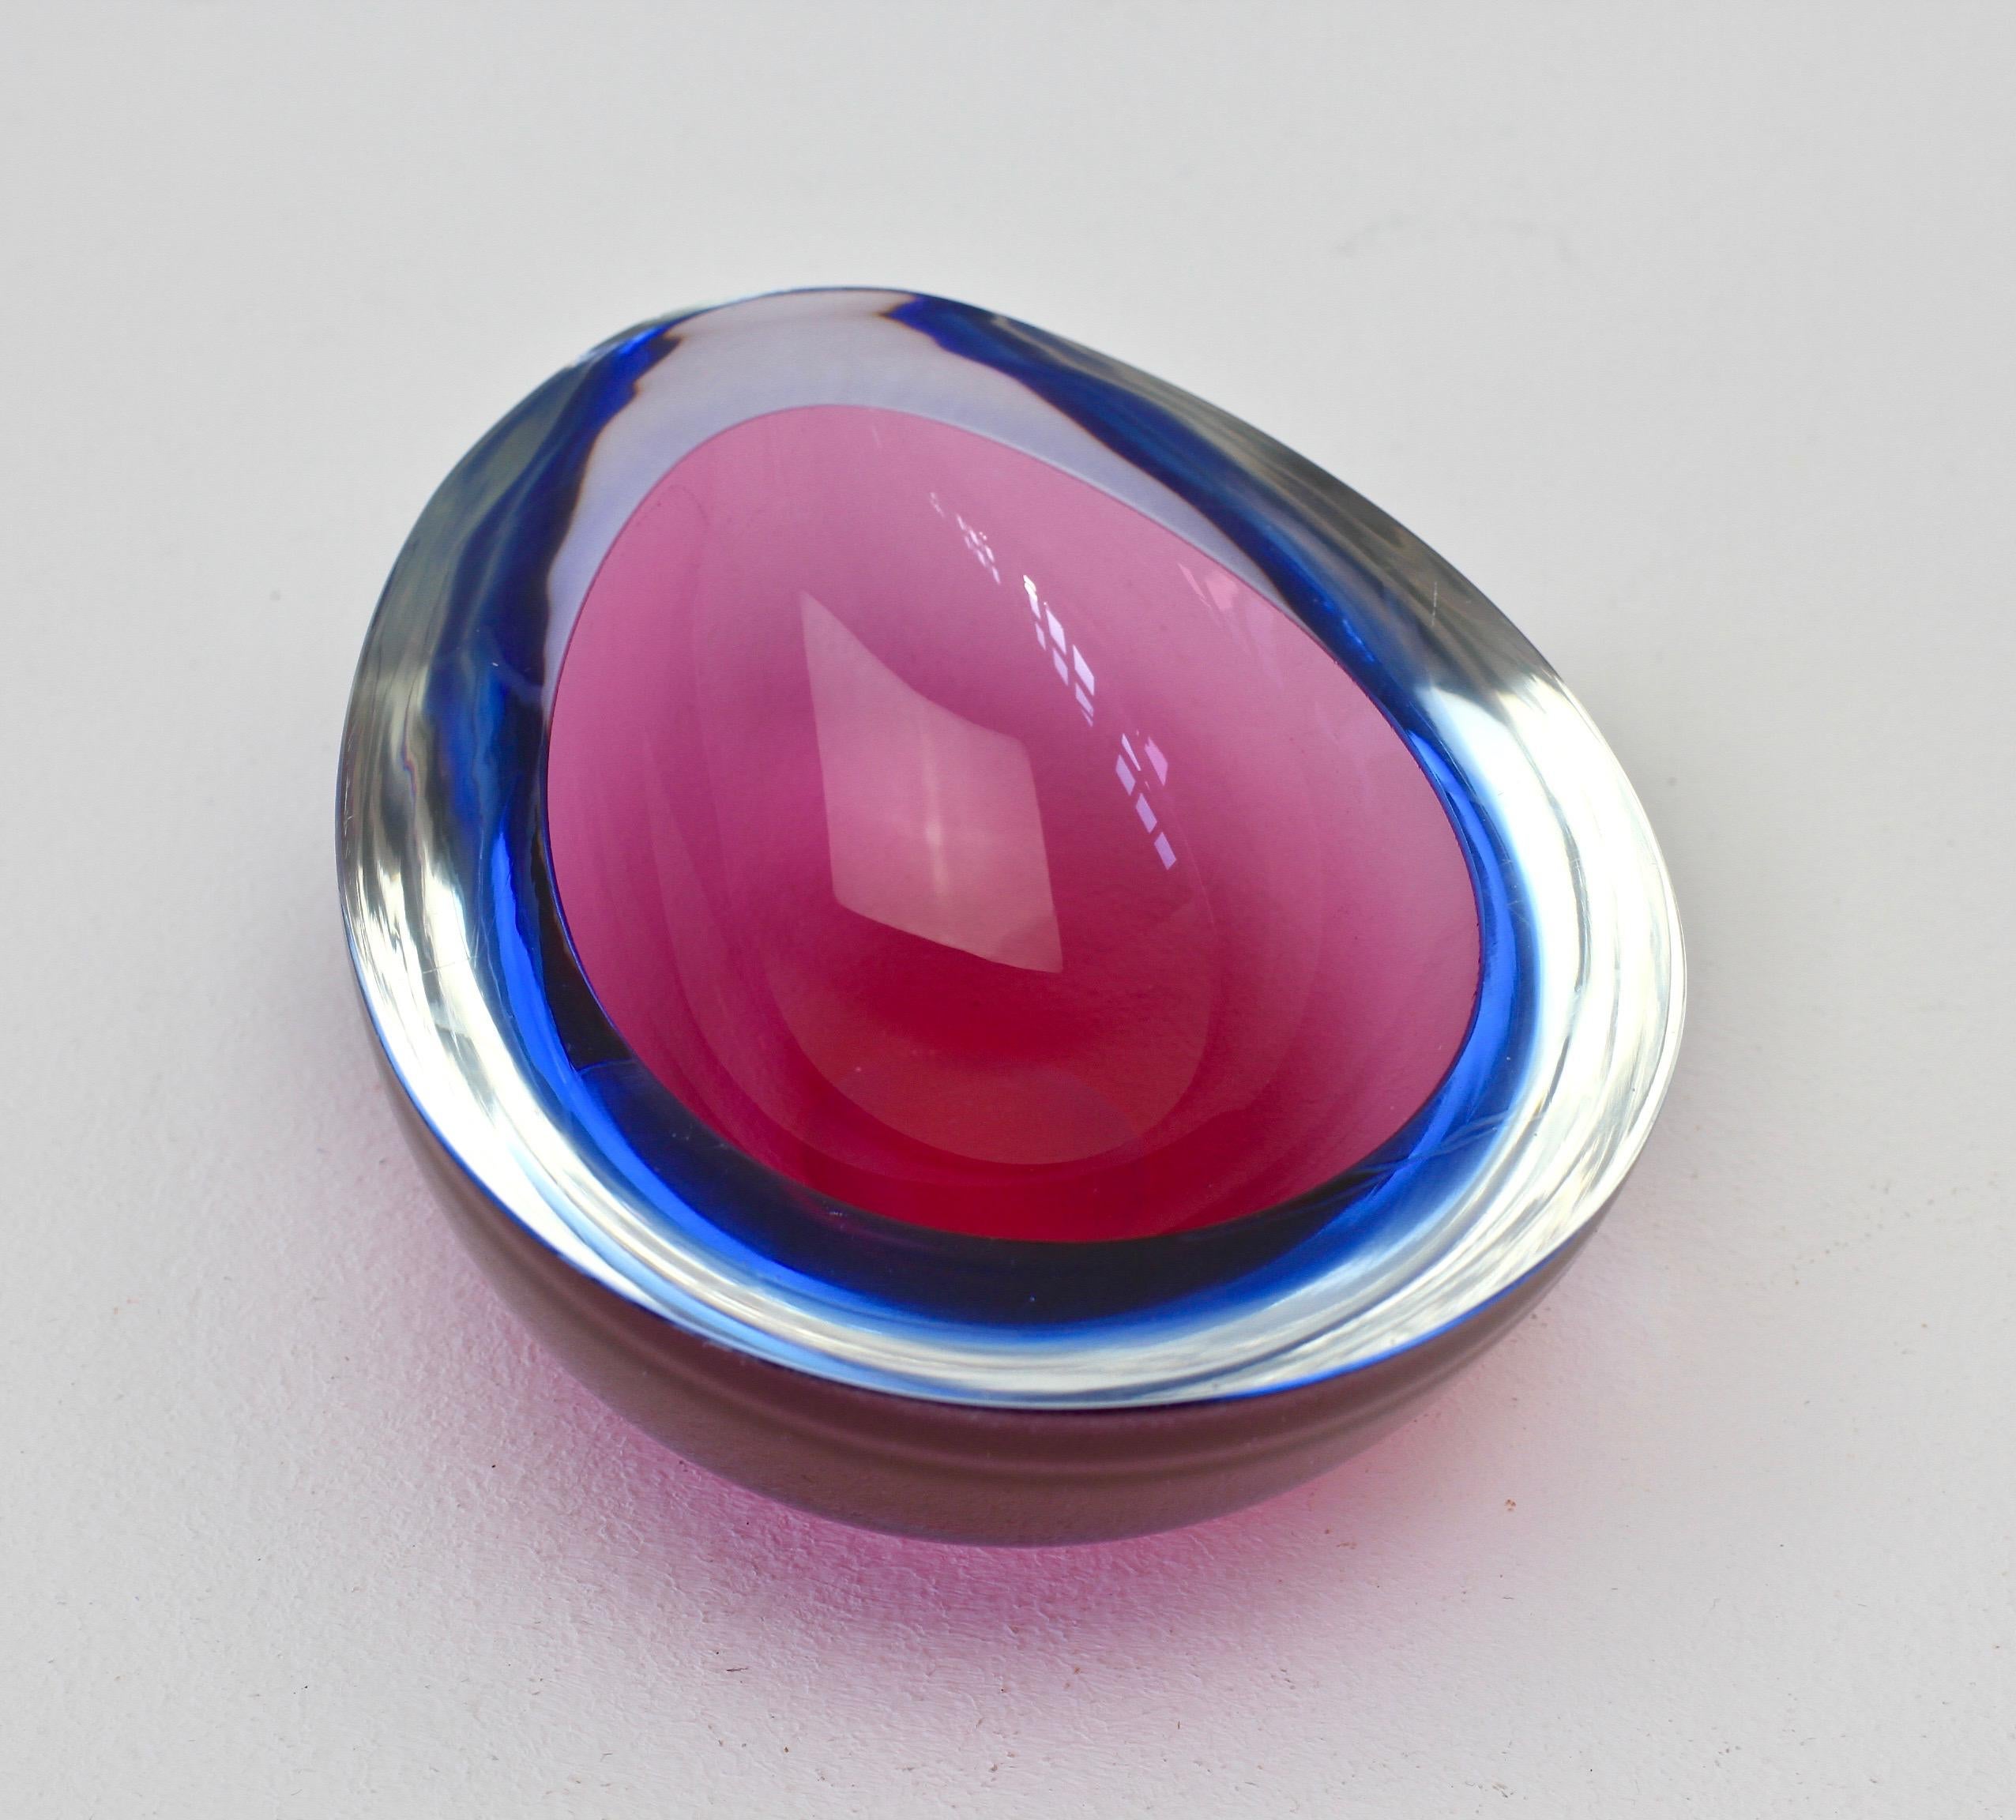 Mid-Century Modern Pink and Blue Italian Murano 'Sommerso' Glass Bowl Attributed to Seguso, c.1960s